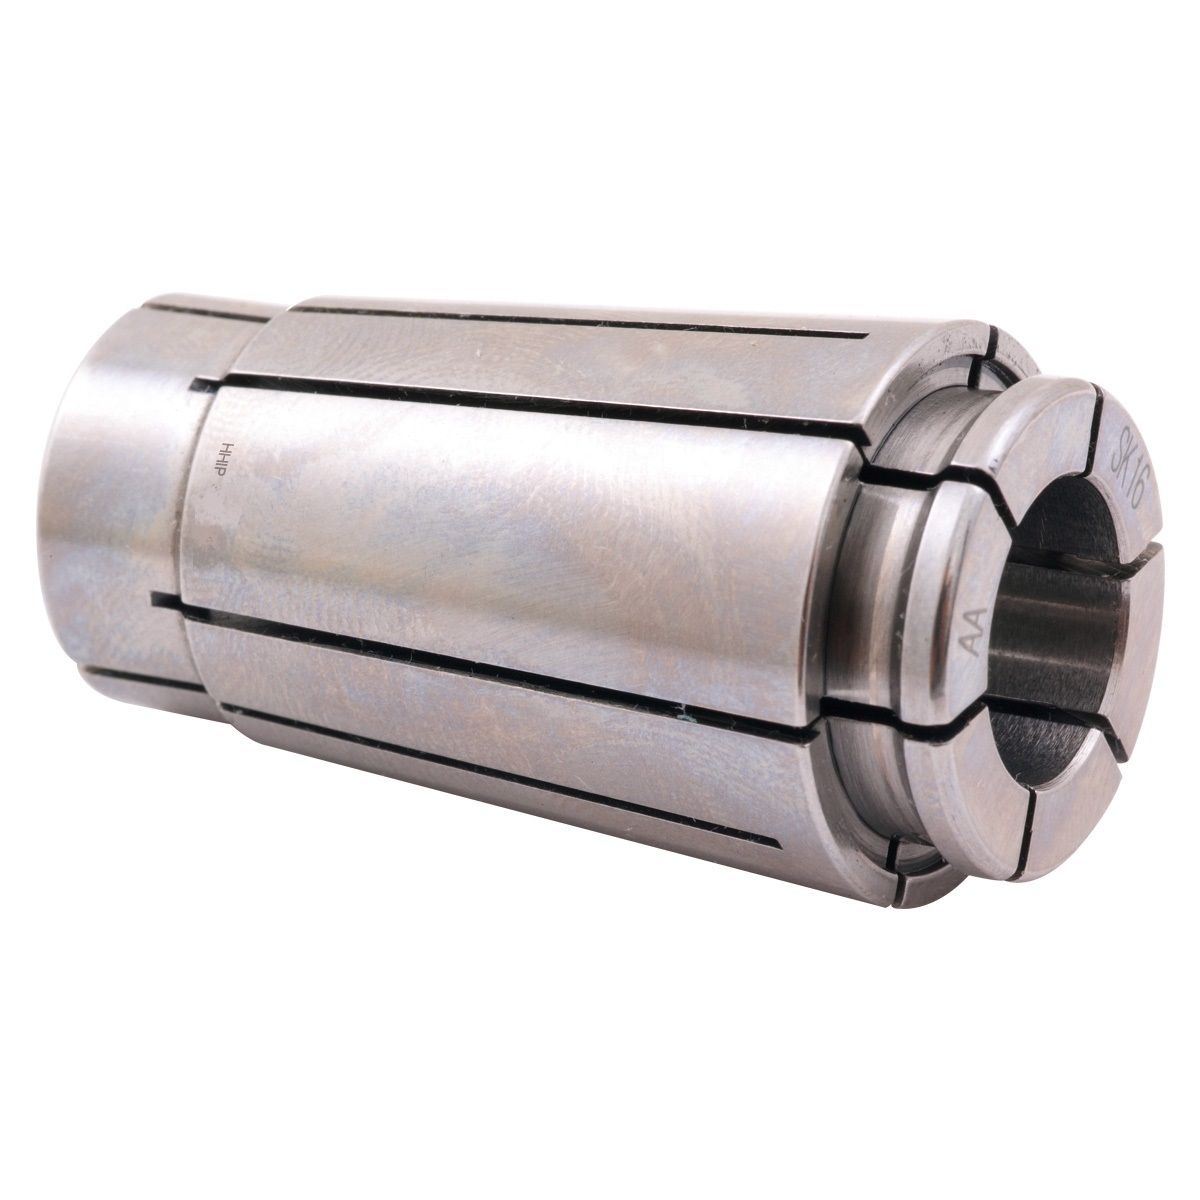 PRO-SERIES 5/8" SK16 LYNDEX STYLE COLLET (3901-5464)